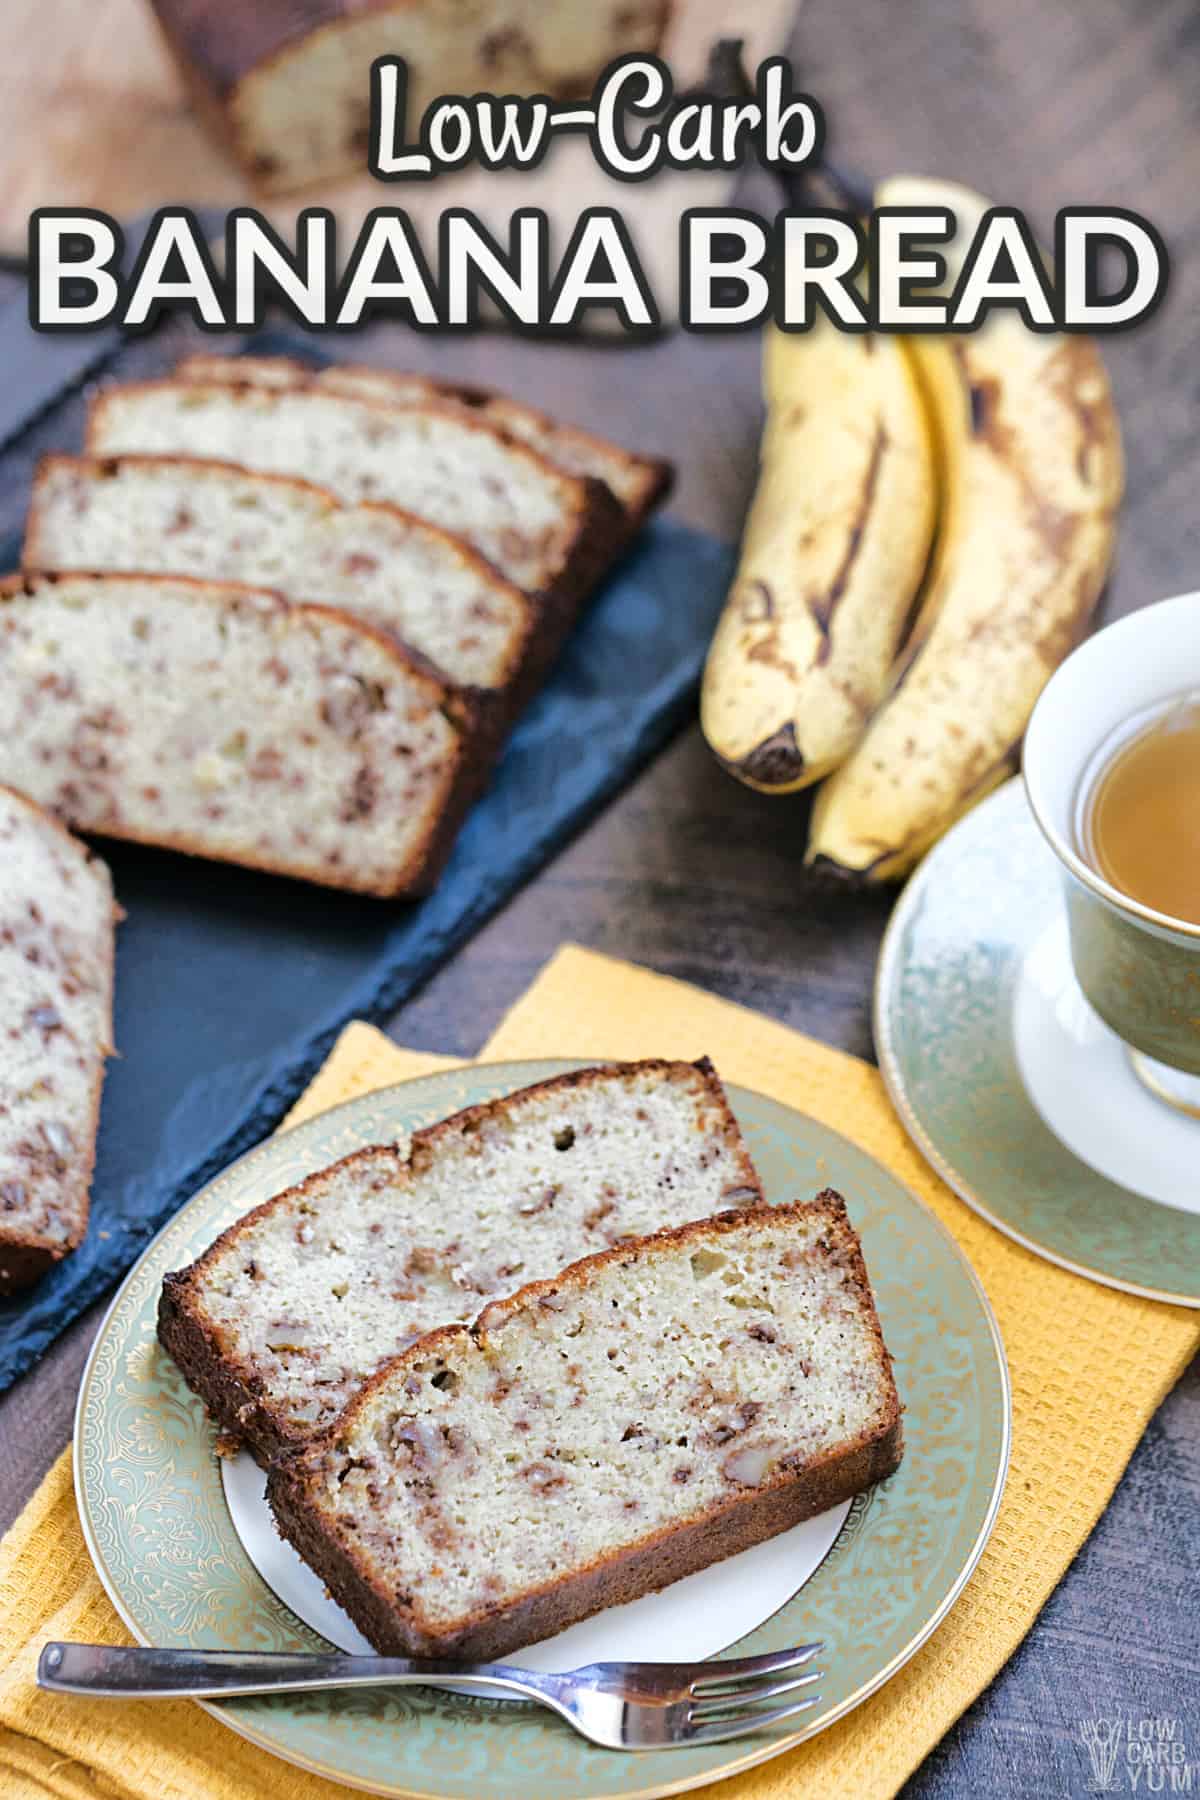 low carb banana bread with text overlay.